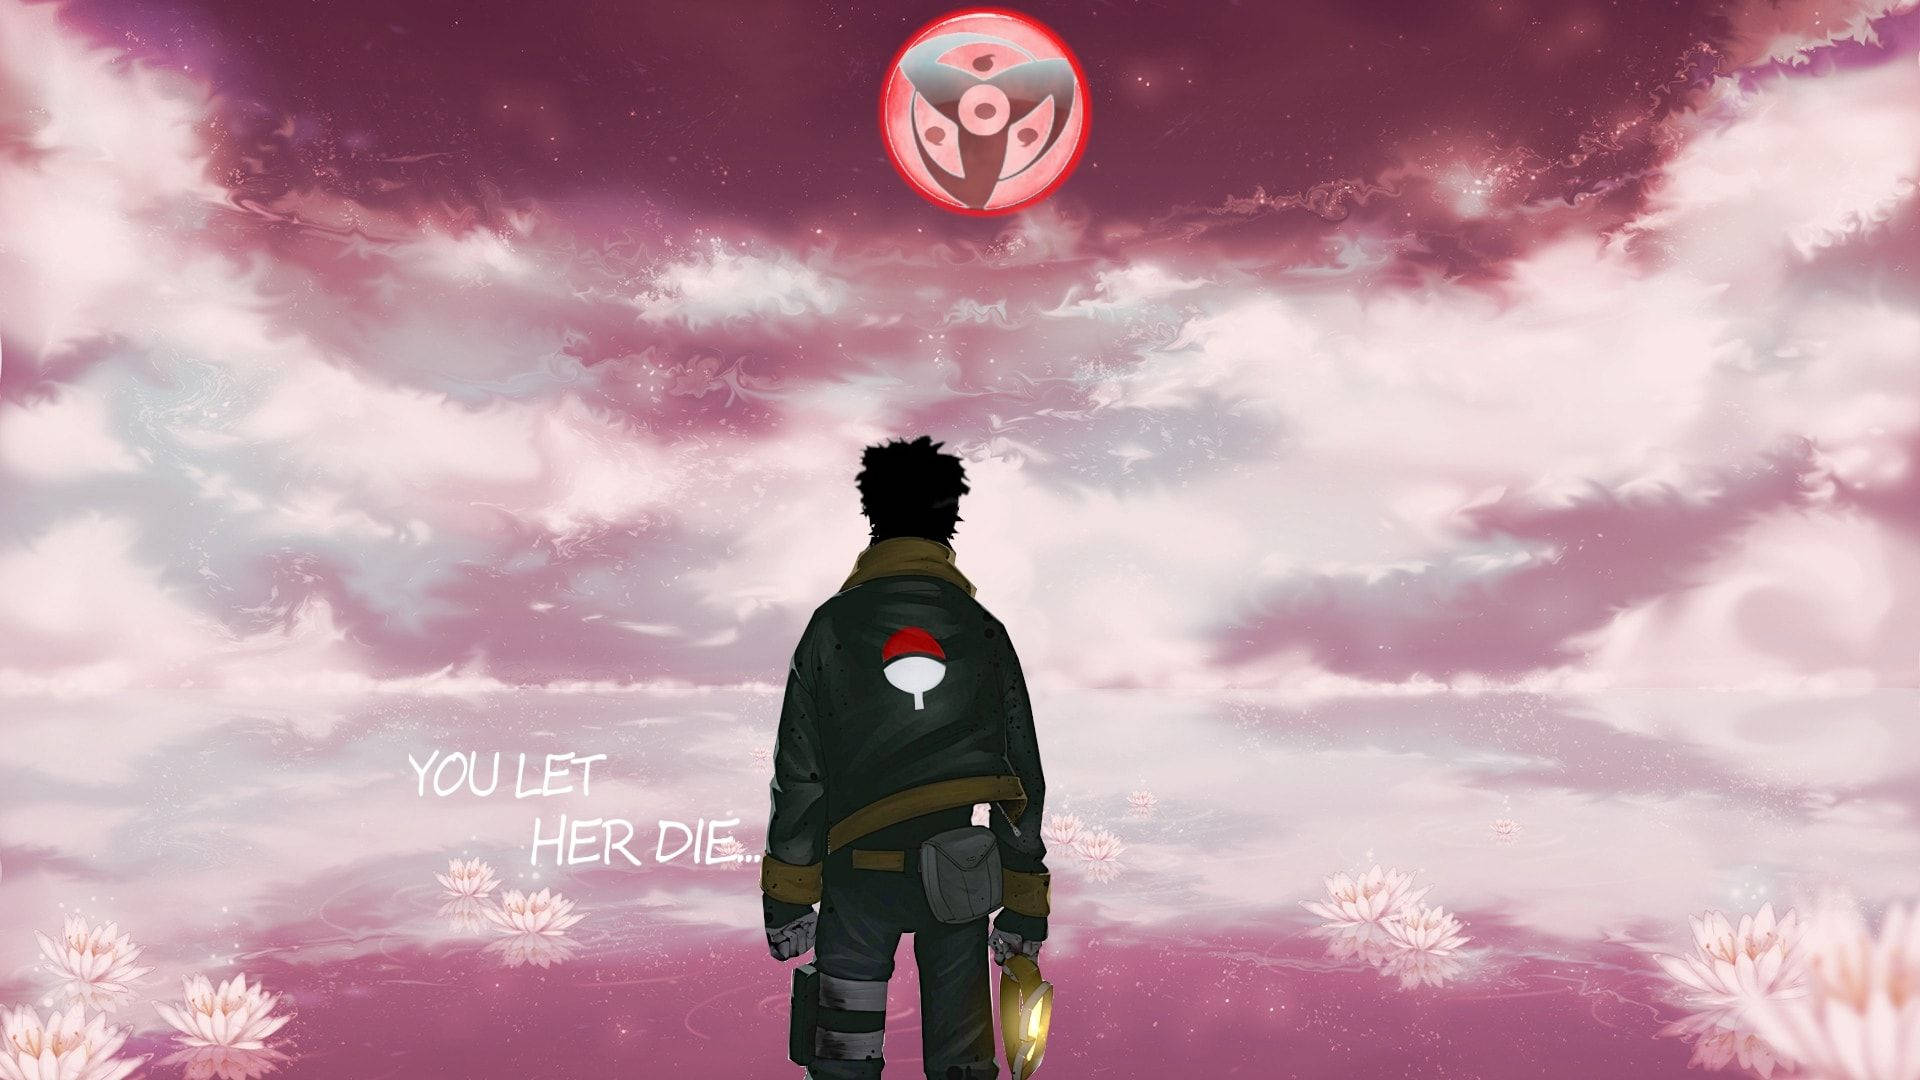 “Once I realized the truth, there was no way back” Wallpaper